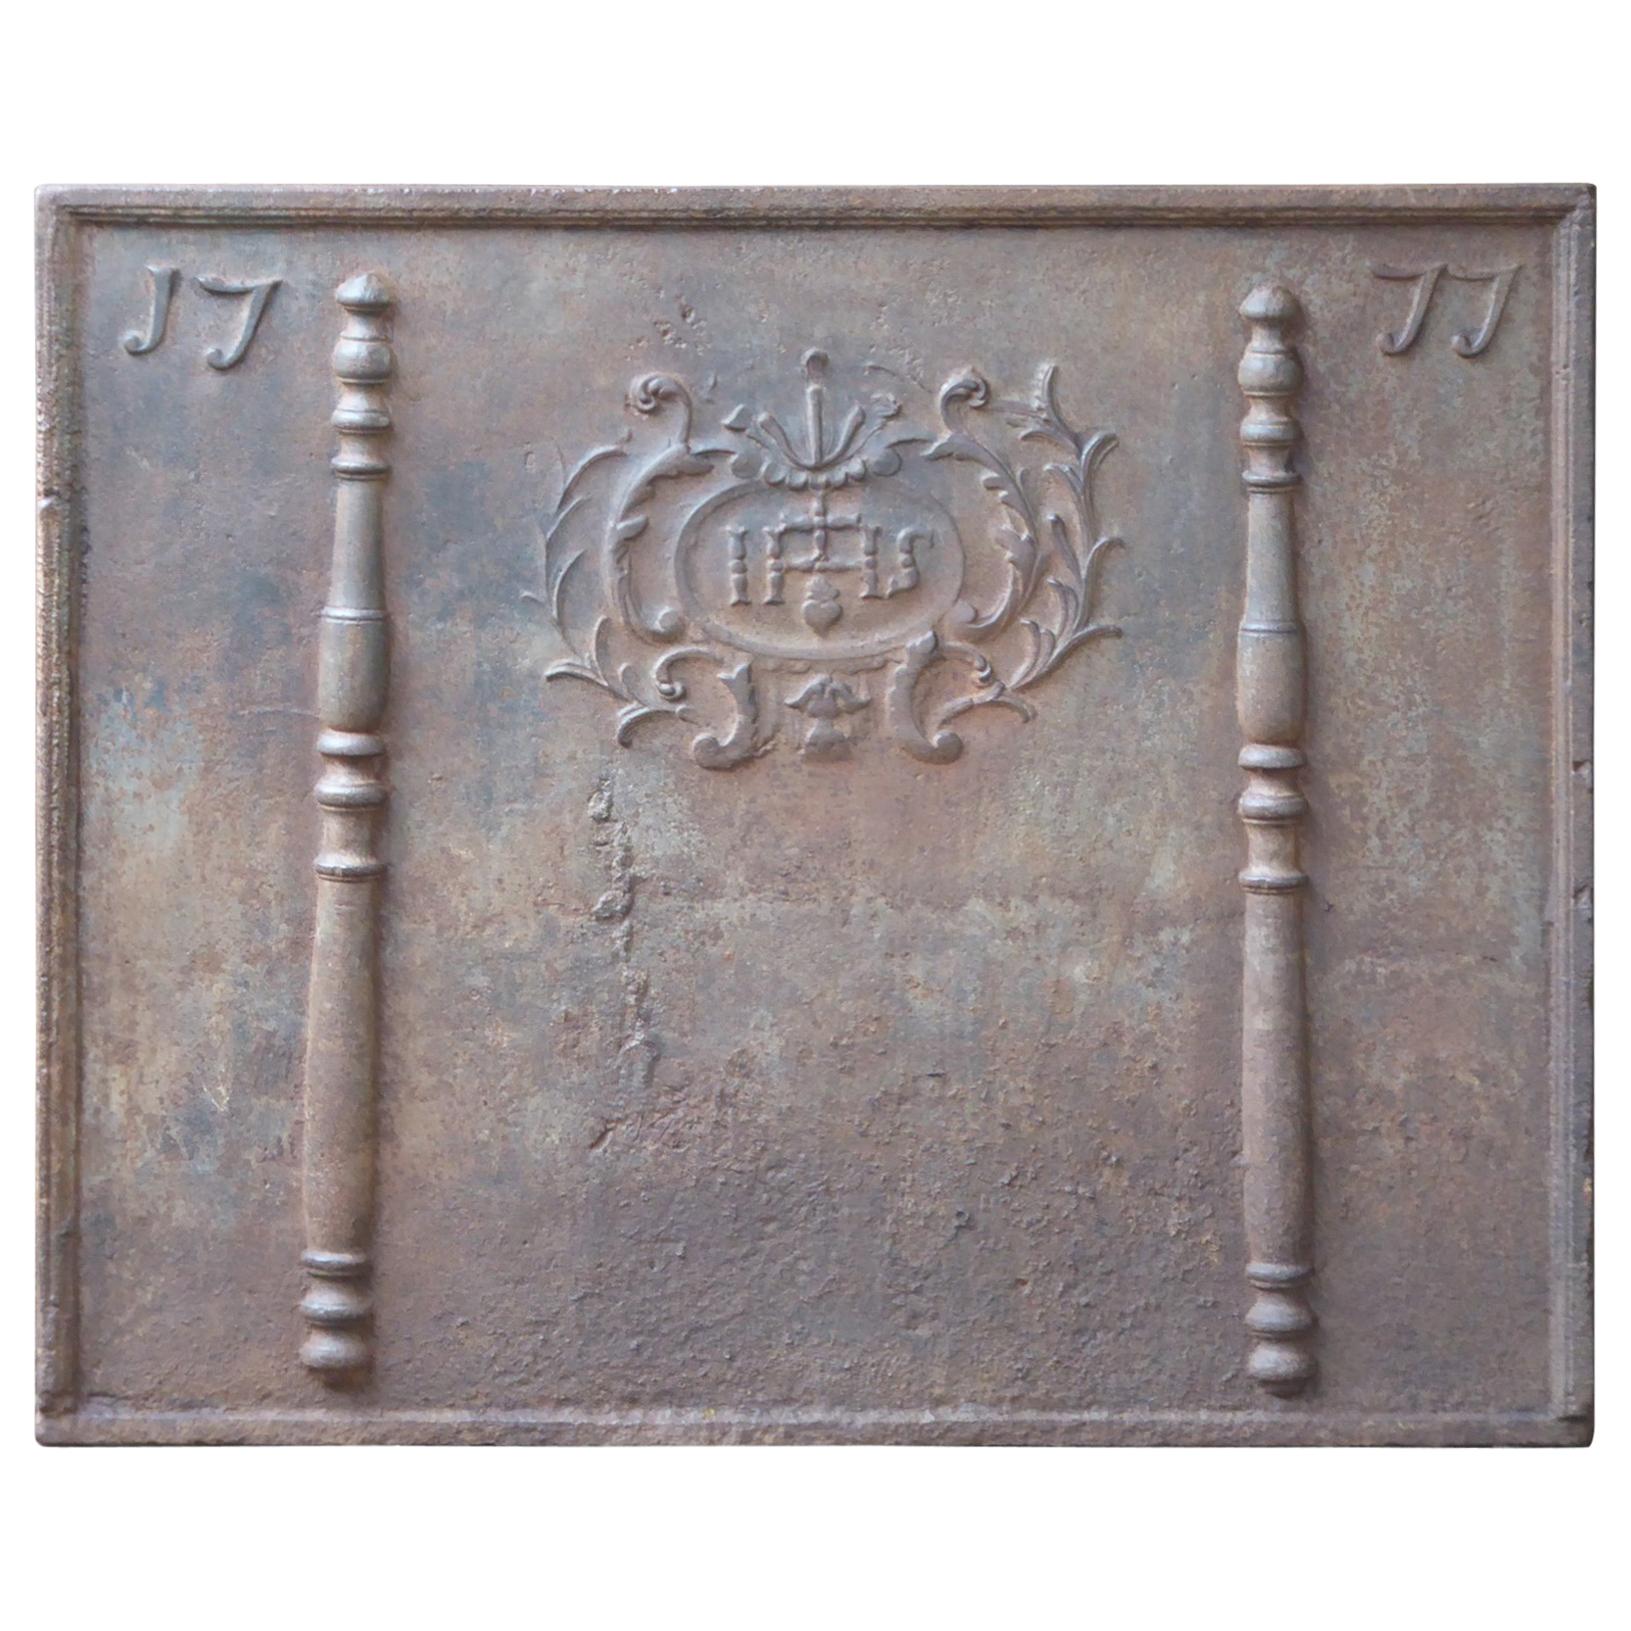 Large French Fireback with Pillars and IHS Monogram, Dated 1777